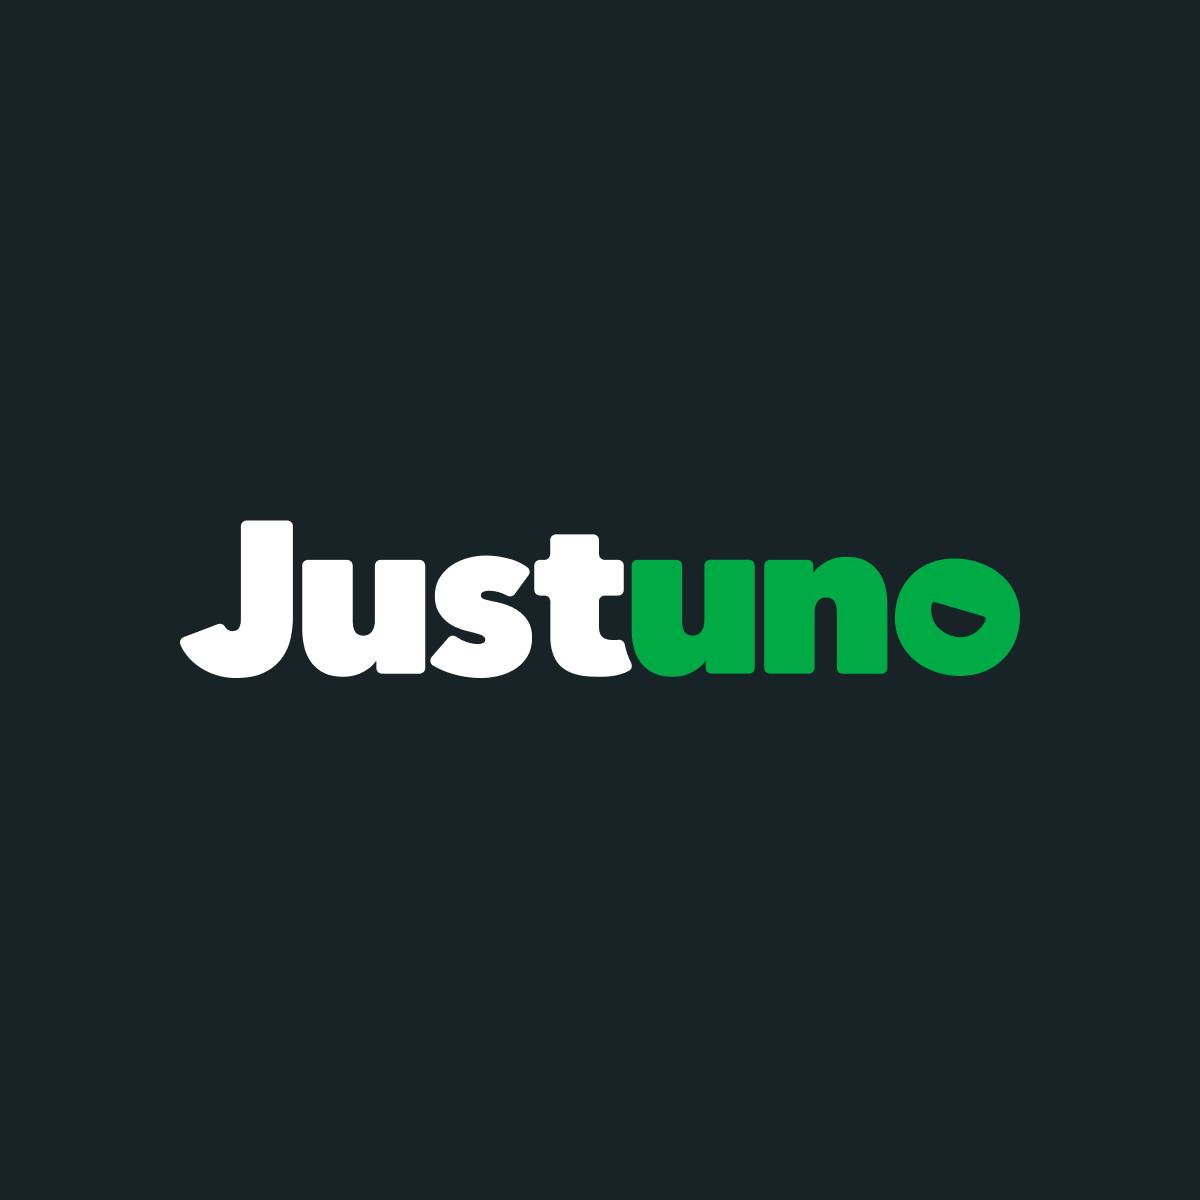 Justuno Launches All-New Conversion Automation Platform to Help Marketers Hit Their Goals